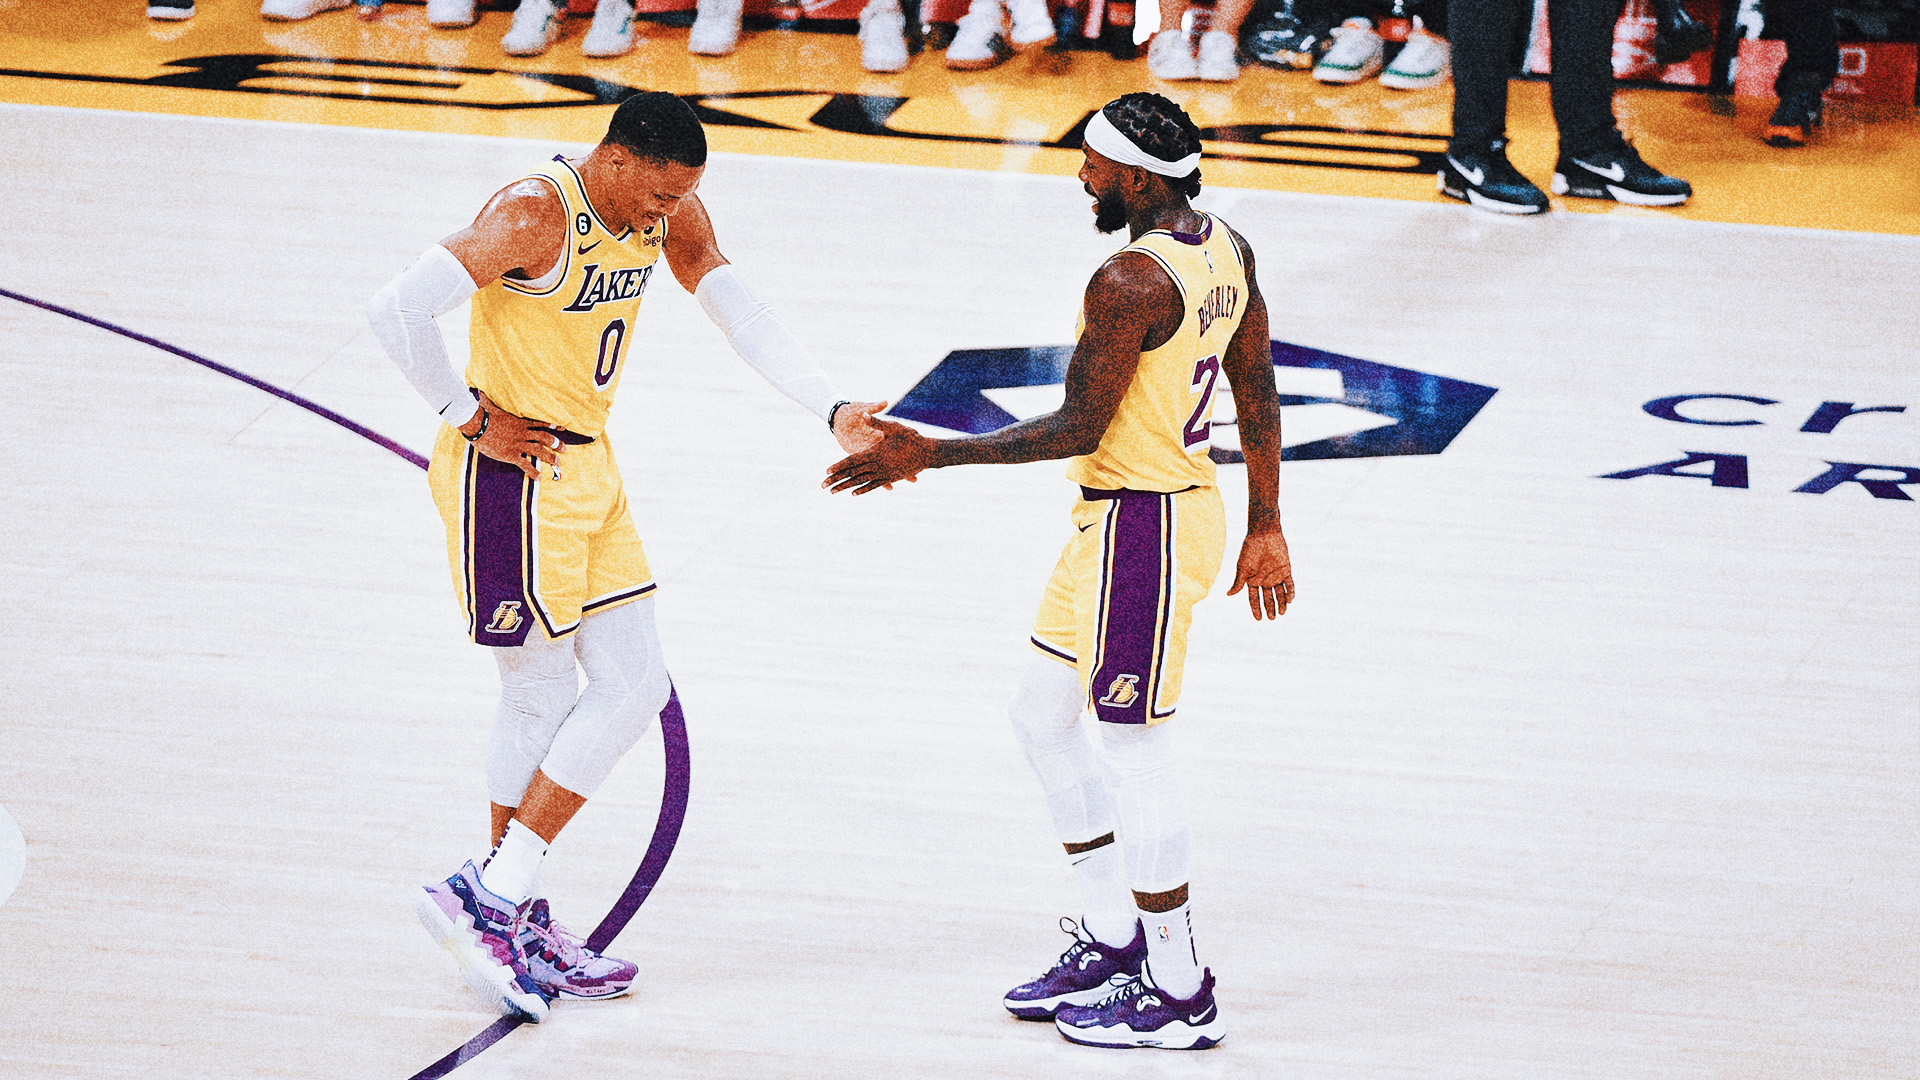 Report: All 2022-23 Lakers players to receive rings if L.A. wins NBA title